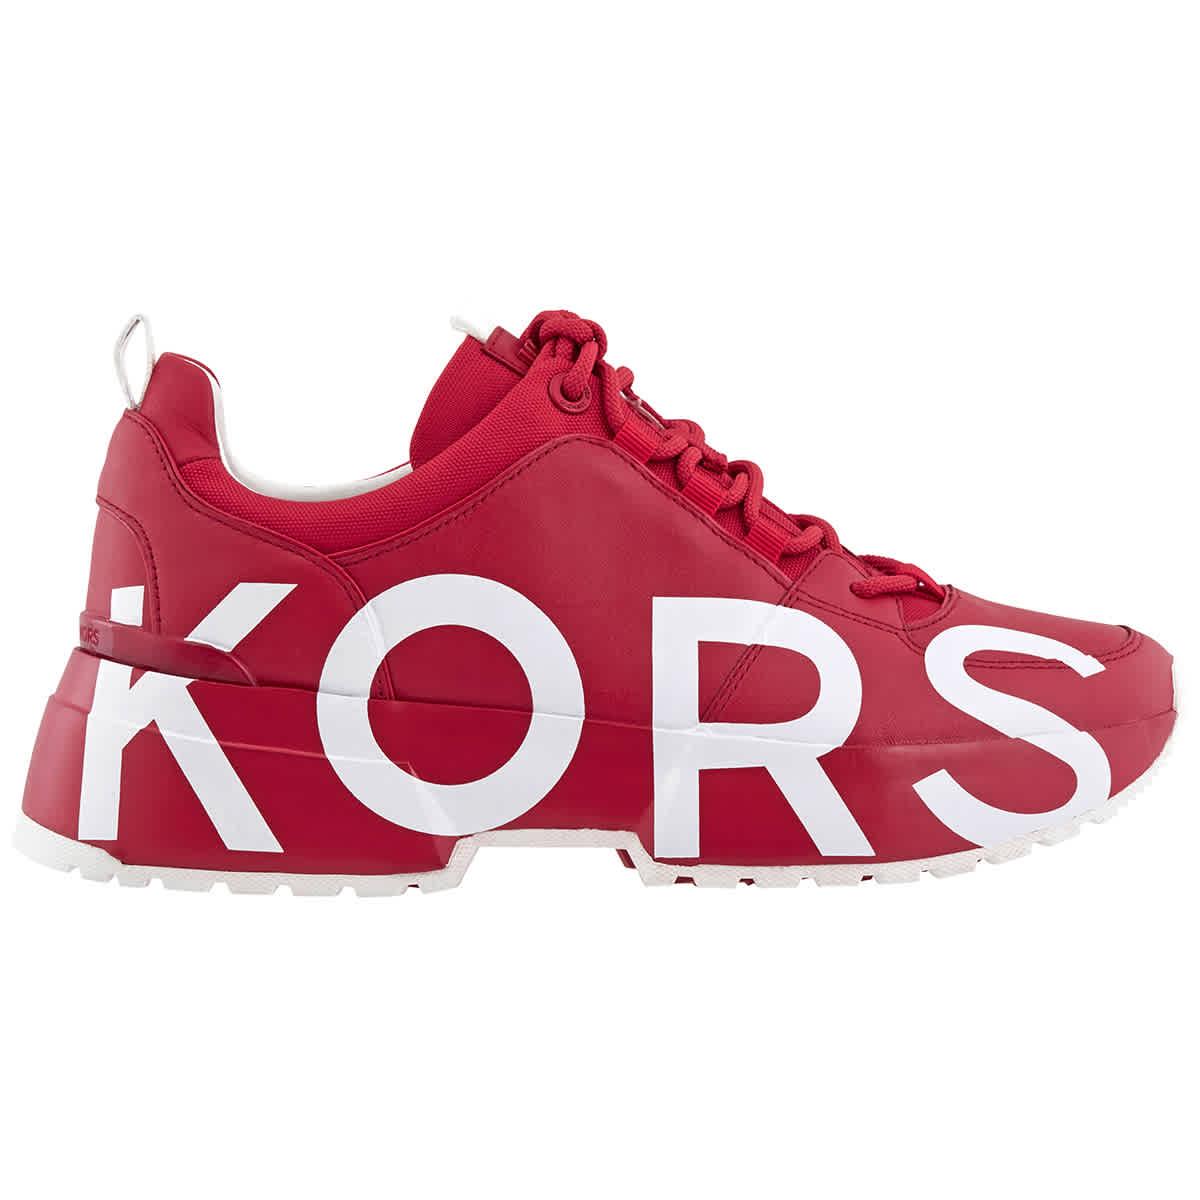 Michael Kors Leather Ladies Cosmo Trainer Logo Sneakers in Red - Lyst